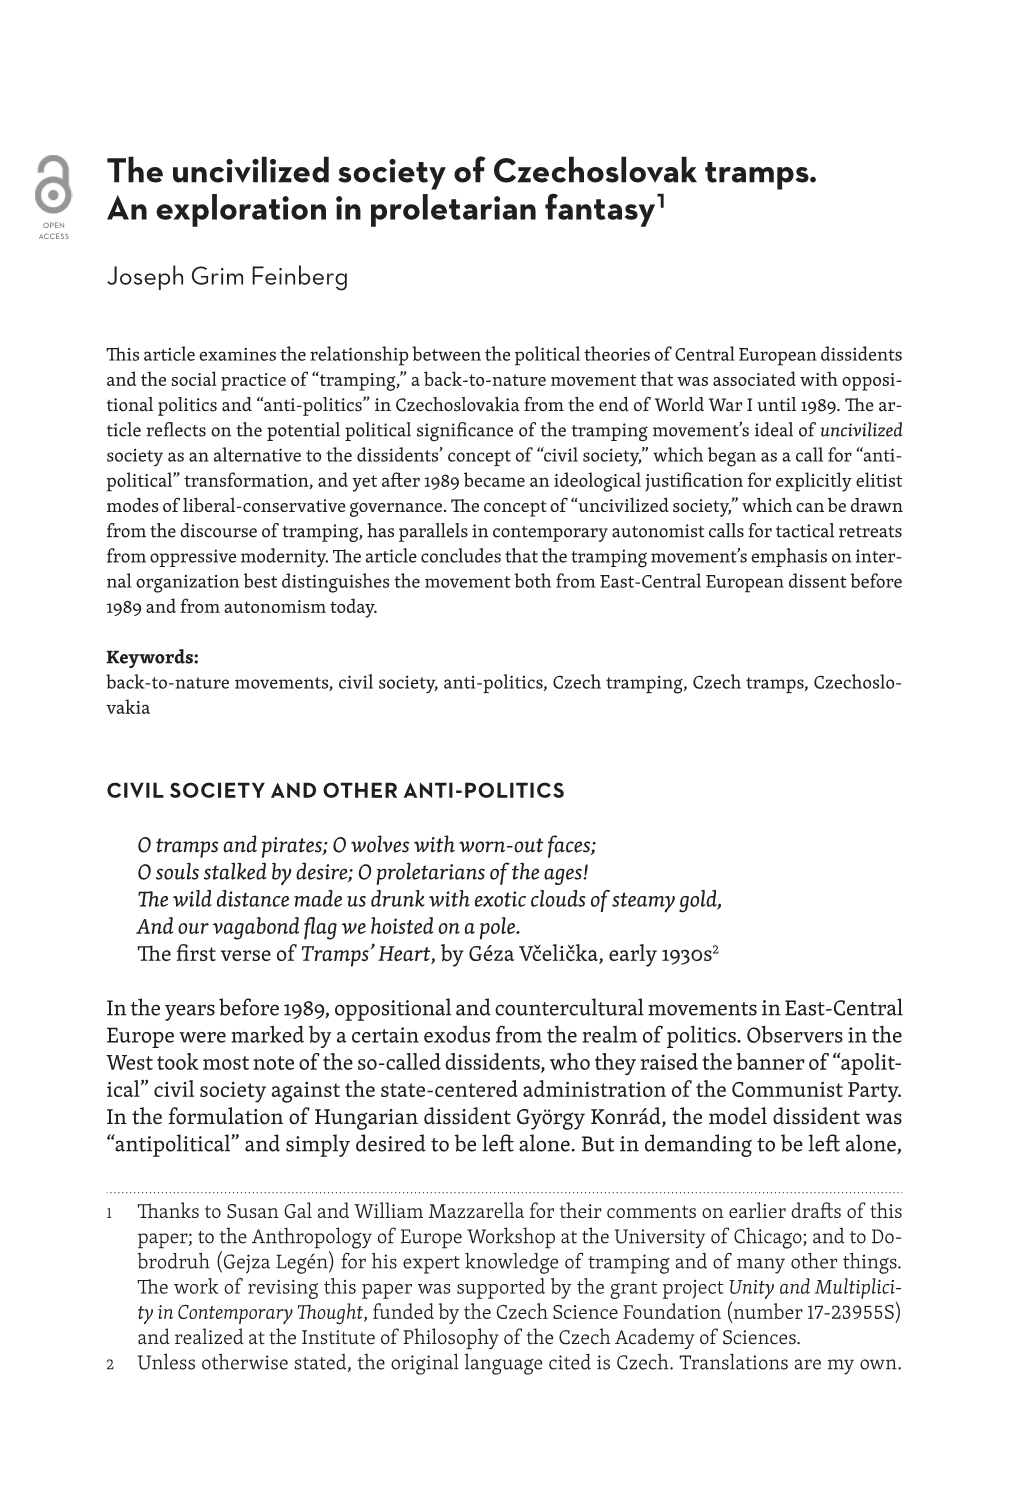 The Uncivilized Society of Czechoslovak Tramps. an Exploration in Proletarian Fantasy1 OPEN ACCESS Joseph Grim Feinberg